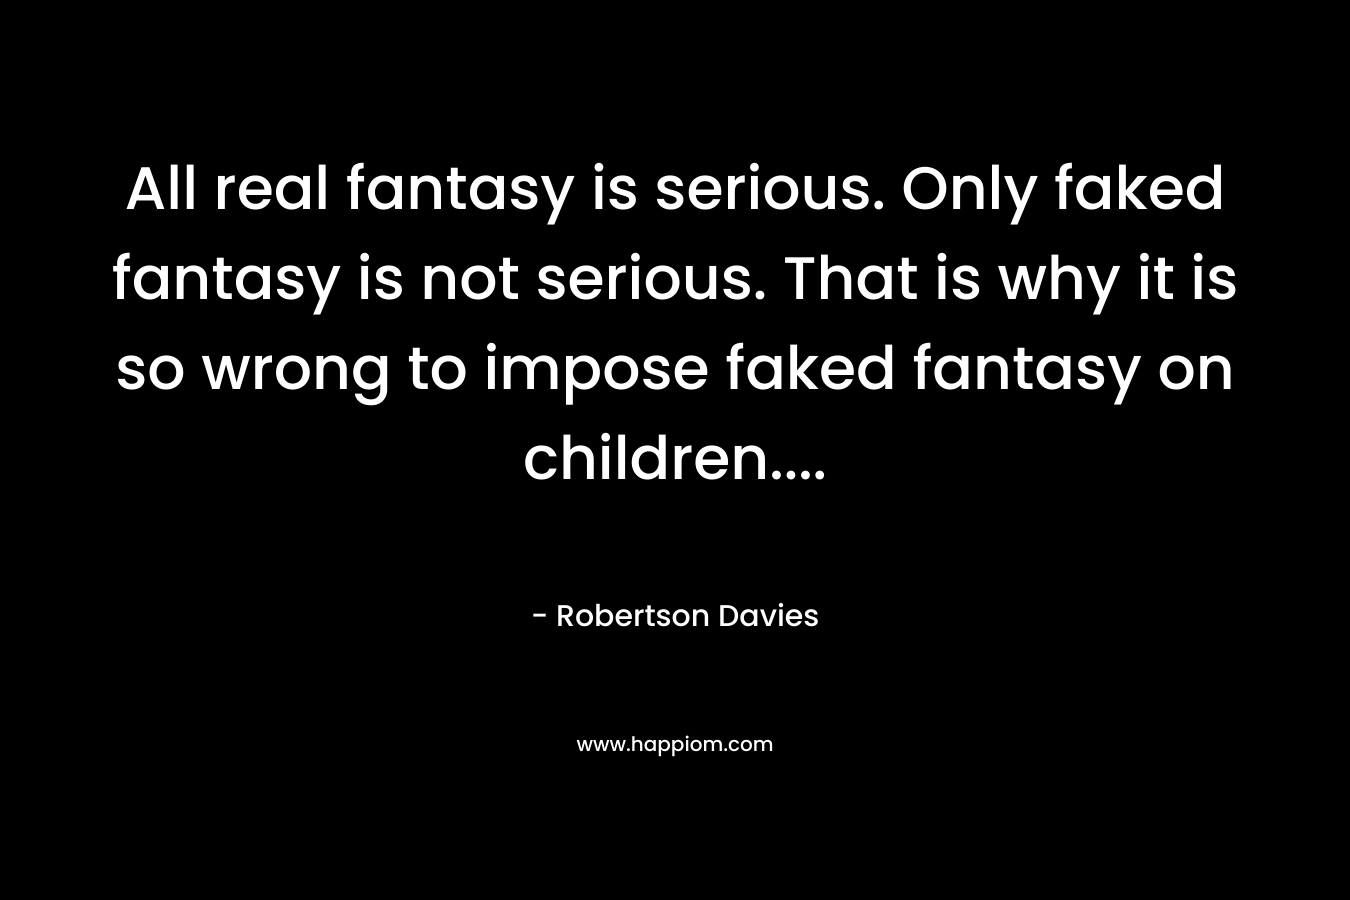 All real fantasy is serious. Only faked fantasy is not serious. That is why it is so wrong to impose faked fantasy on children…. – Robertson Davies